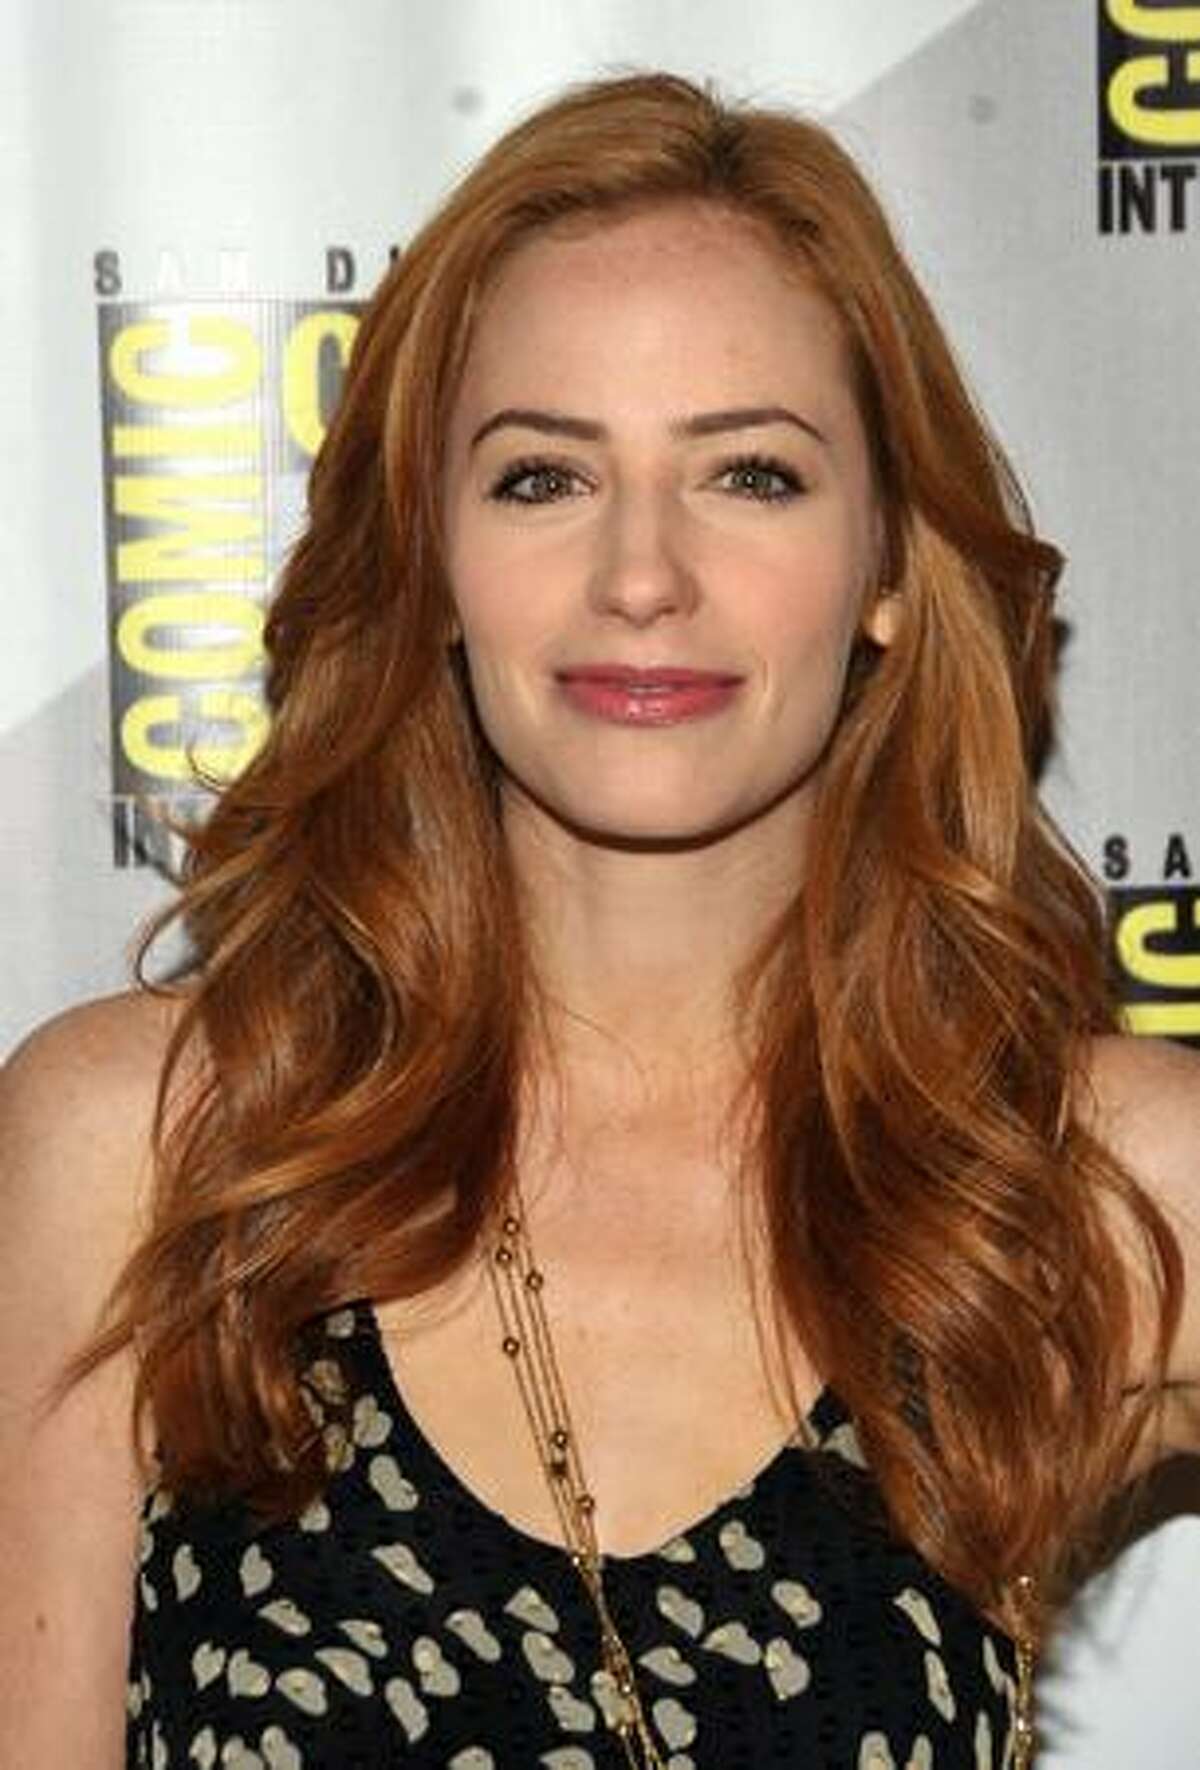 SAN DIEGO - JULY 25: Actress Jaime Ray Newman attends the "Eastwick" pilot screening at Comic-Con 2009 held at San Diego Convention Center on July 25, 2009 in San Diego, California.